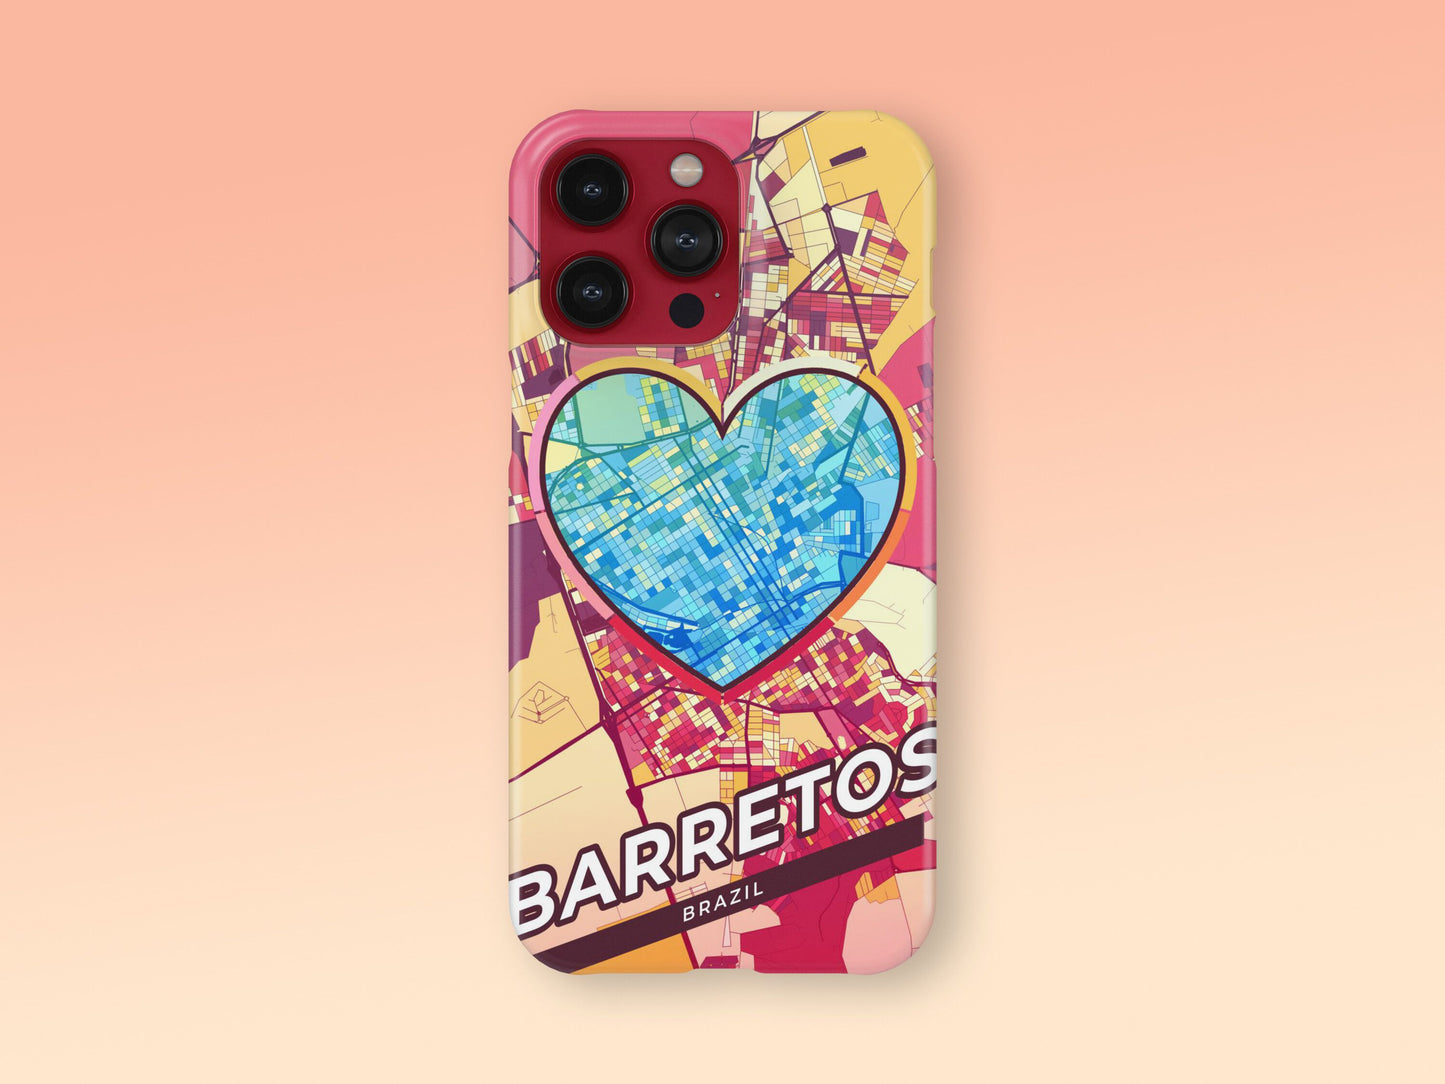 Barretos Brazil slim phone case with colorful icon. Birthday, wedding or housewarming gift. Couple match cases. 2